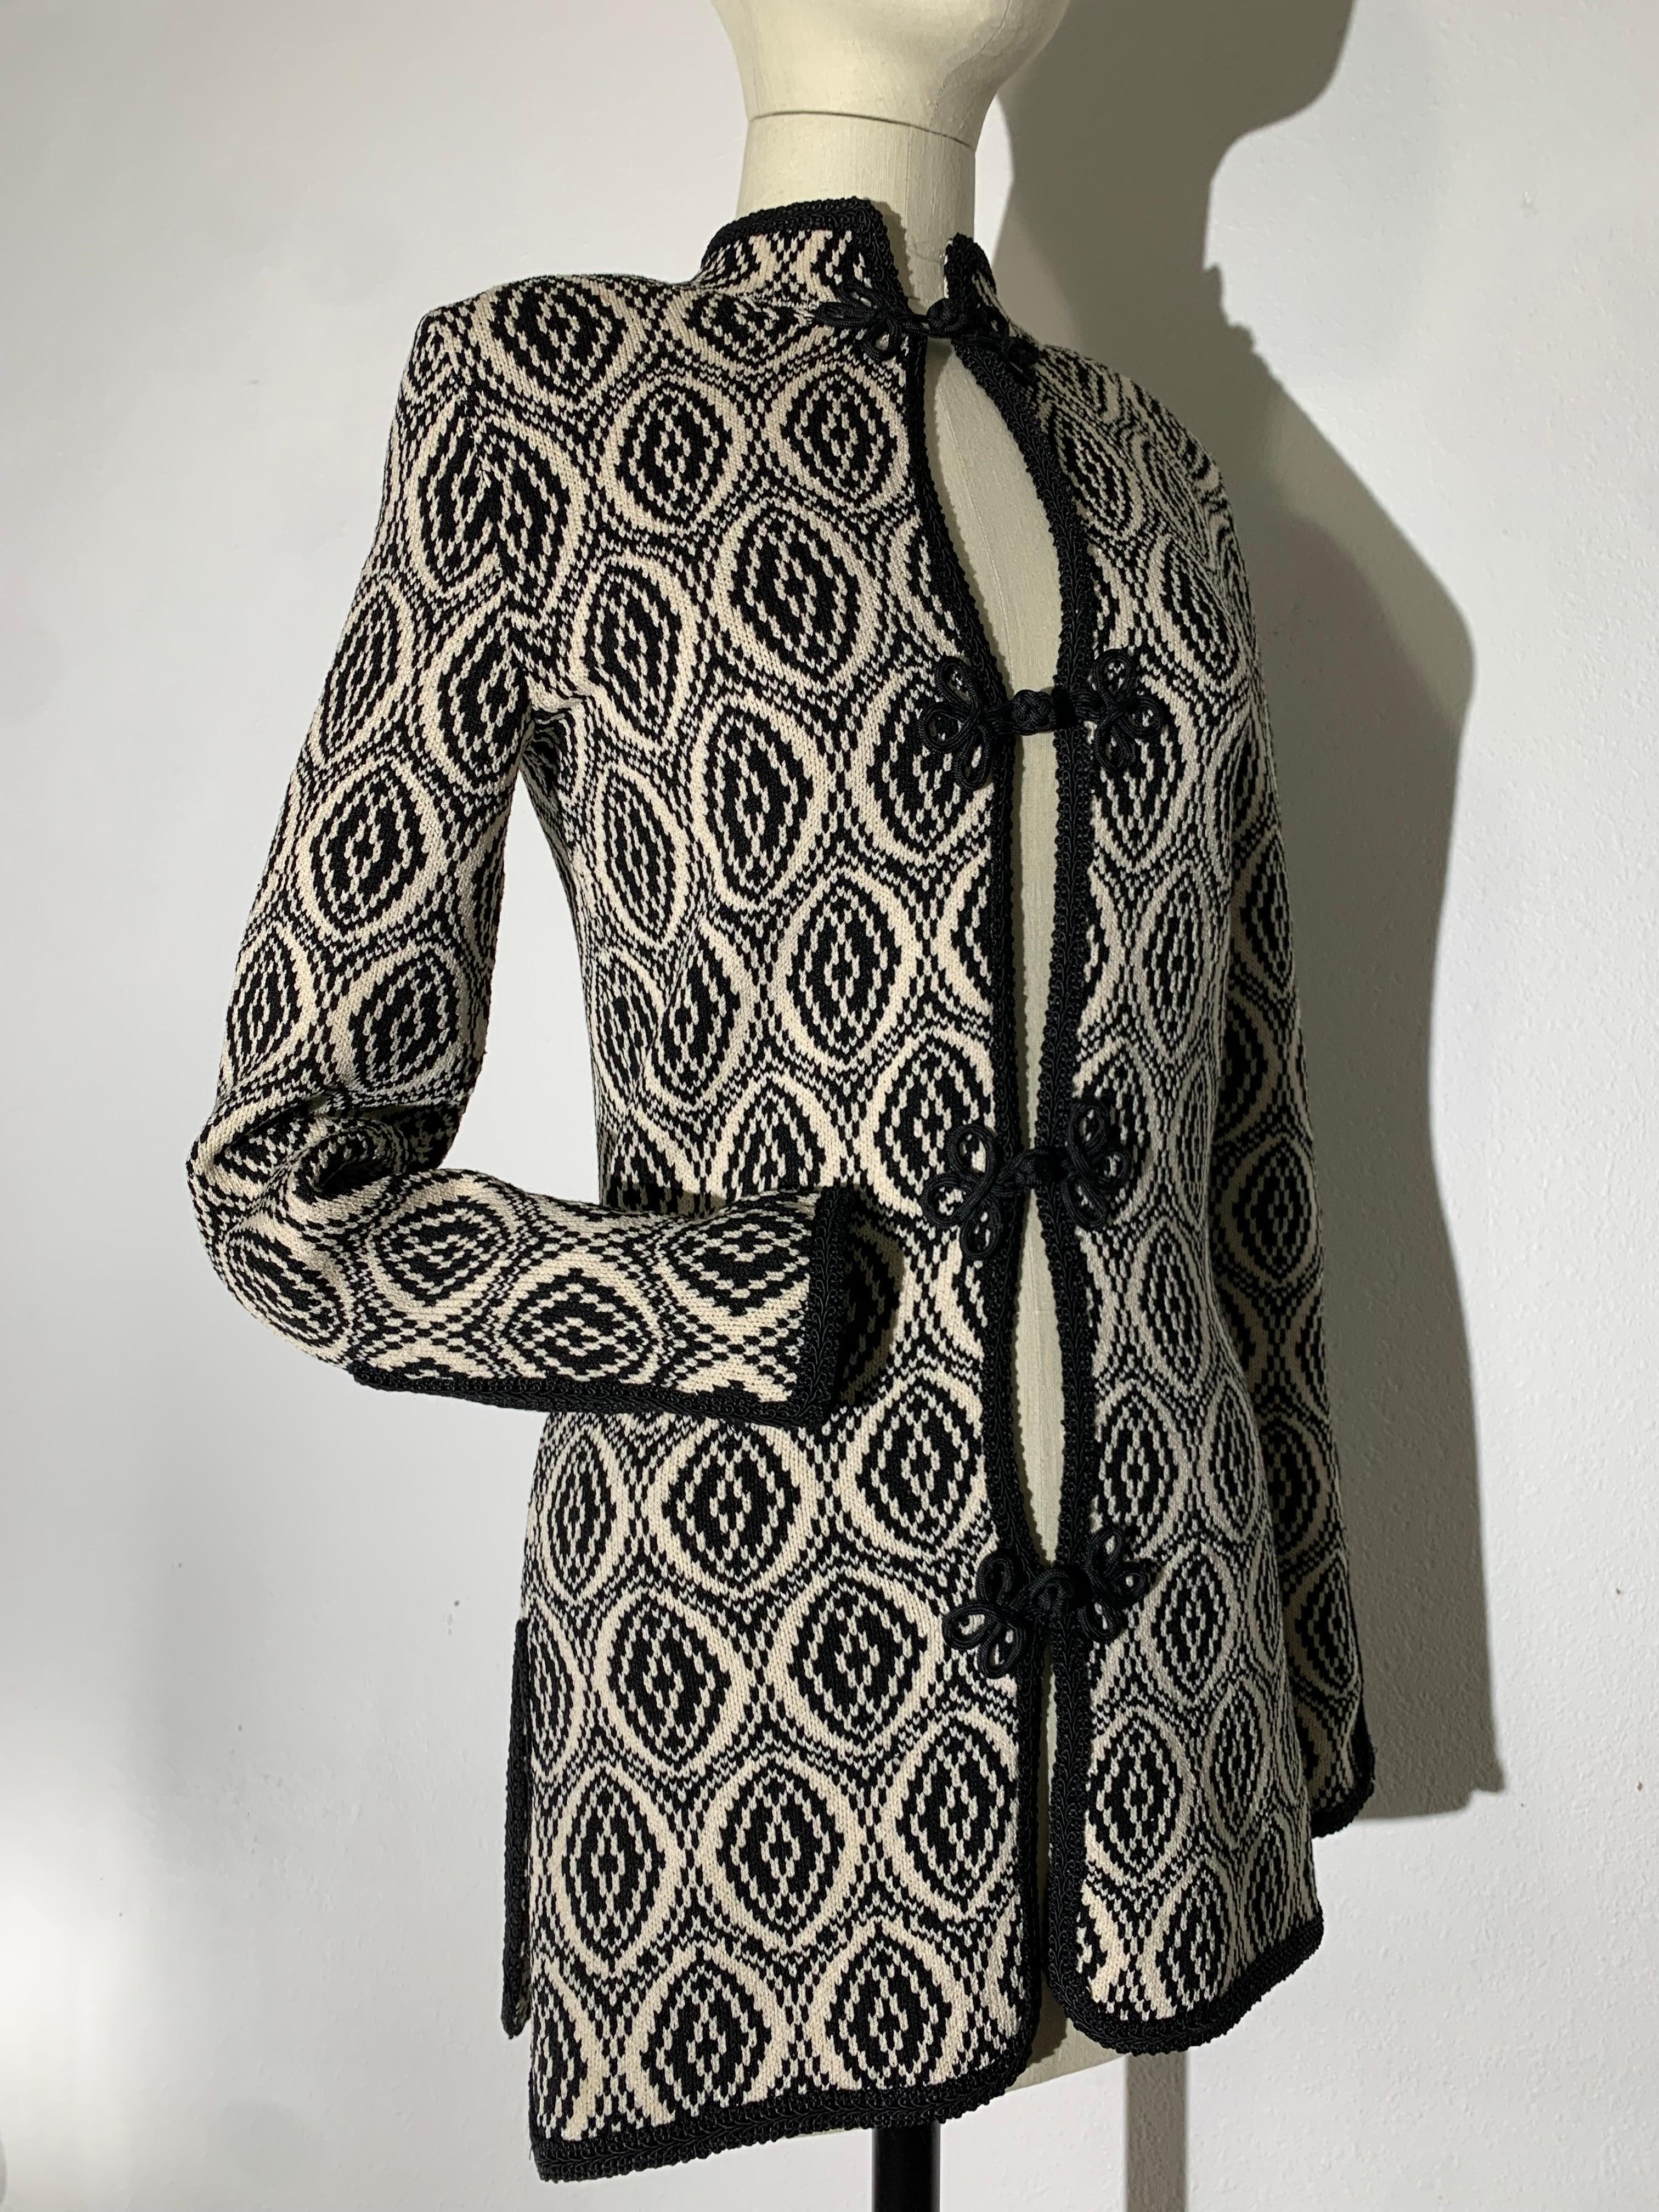 1970s Adolfo Black/White Arabesque Pattern Knit Tunic Jacket w Frog Closures: Banded Collar. Unlined. Side vents. Black knit piping at edges and cuffs. US size Small. 